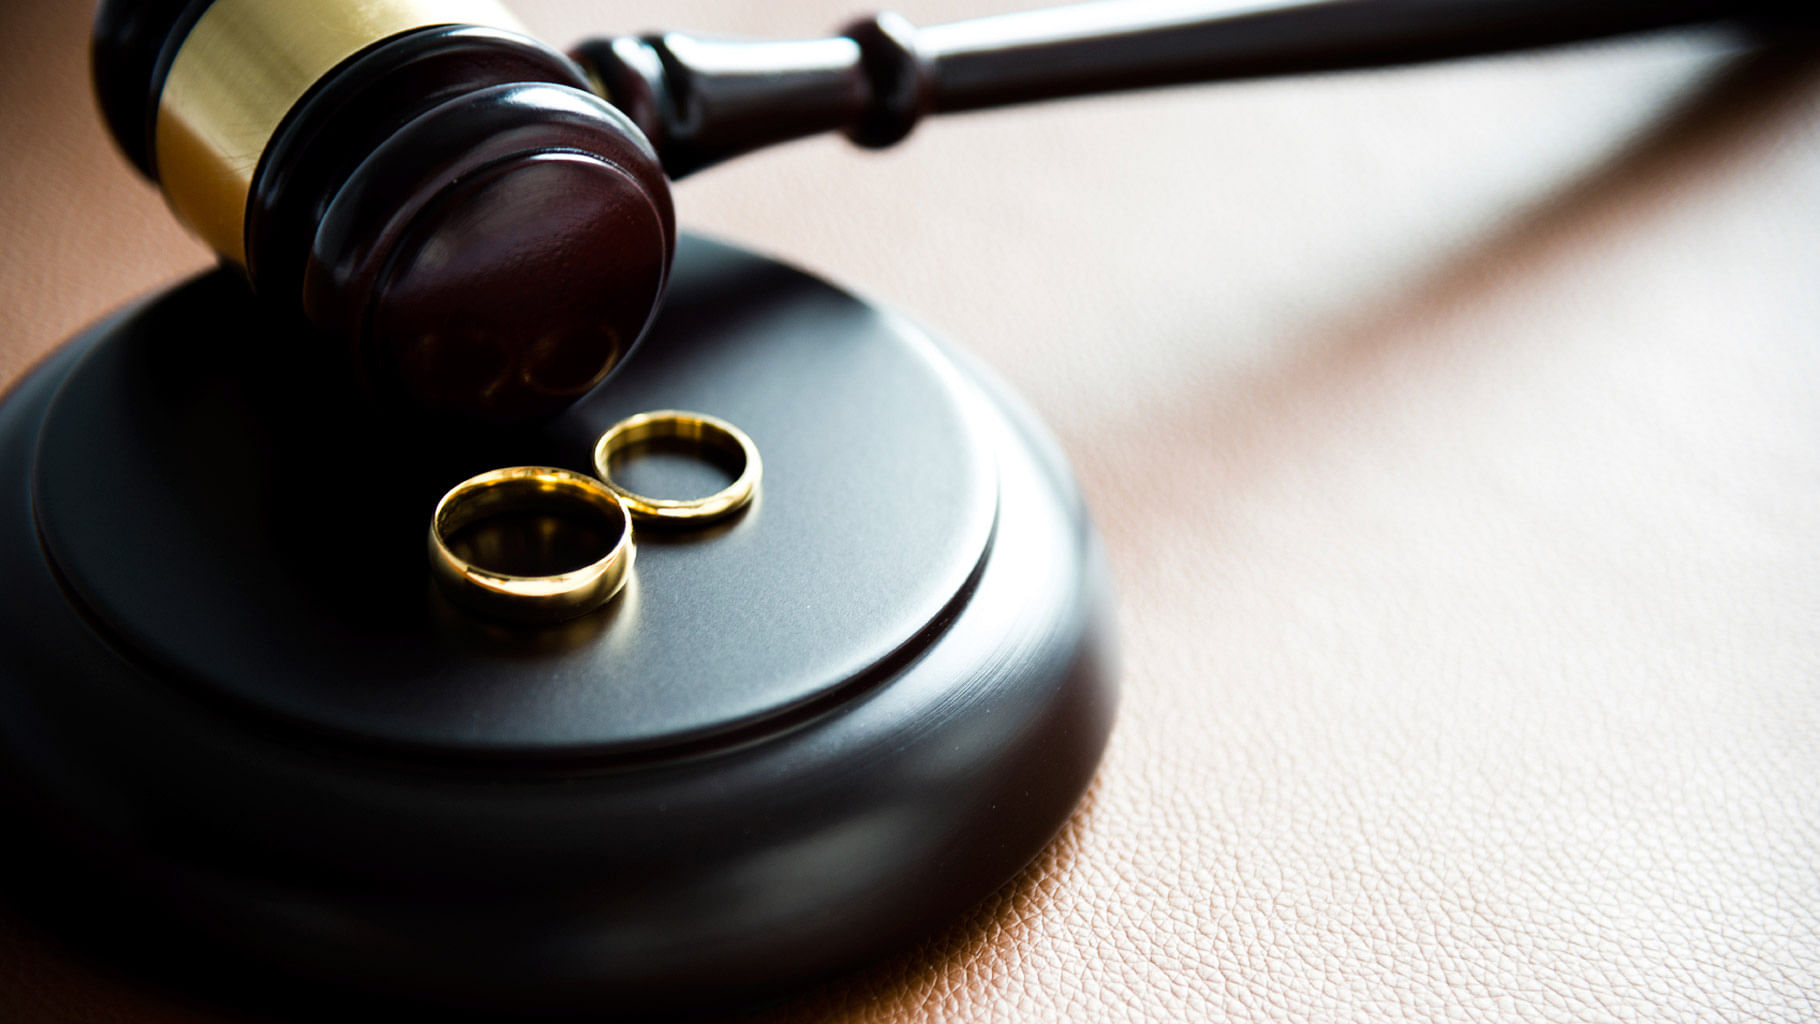 

The object of the cooling off period was to safeguard against a “hurried decision” of divorce.